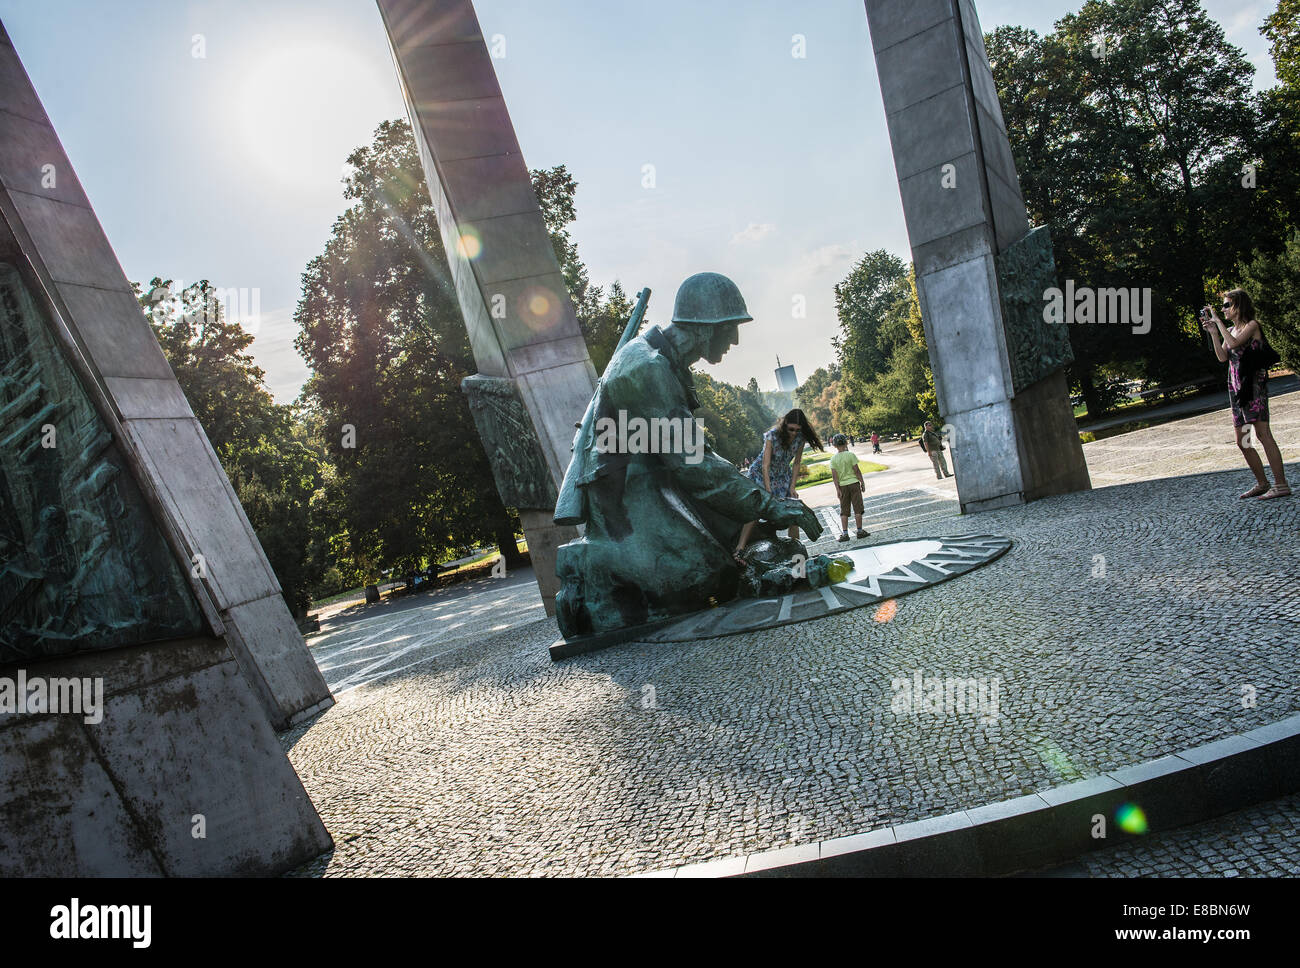 'Glory for sappers' monument in Park of Marshal Edward Rydz-Smigly in Warsaw, Poland Stock Photo